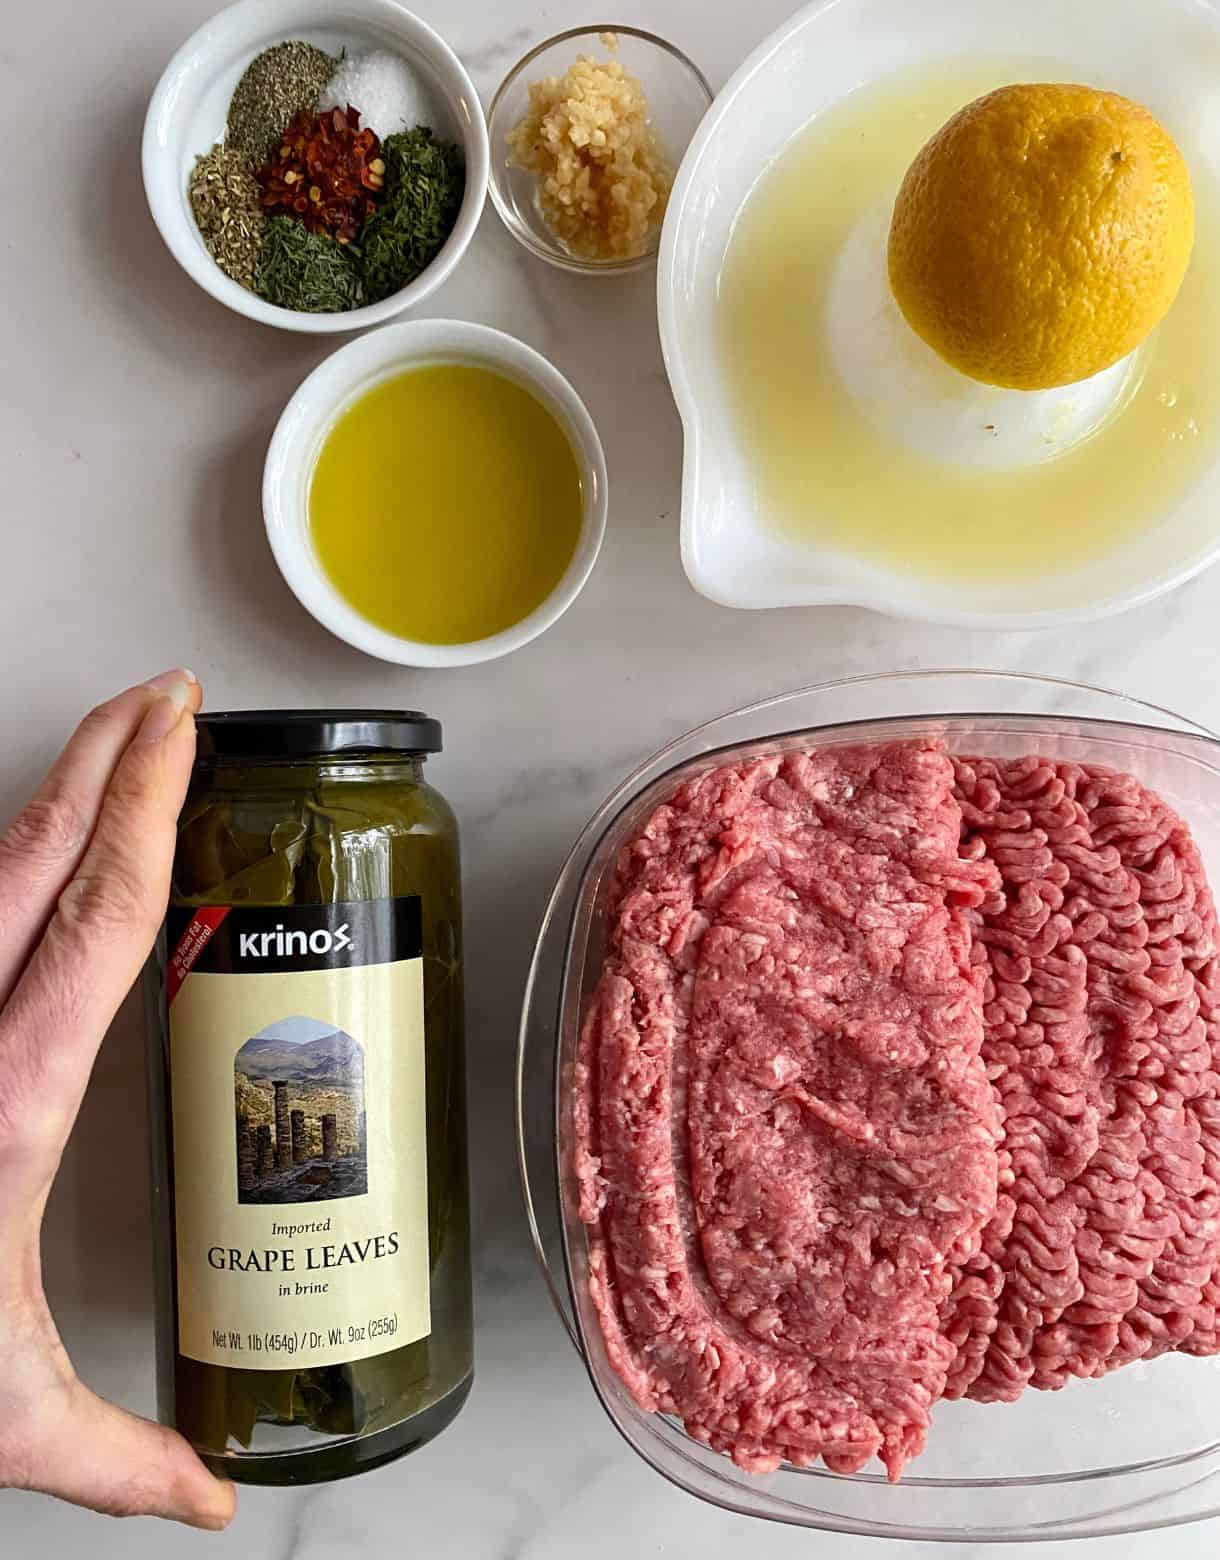 Ingredients for Lebanese Grape Leaves Bowl. Ground beef, lemon juice, olive oil, minced garlic, jarred grape leaves, dried parsley, dried dill, dried oregano, salt, pepper and red pepper flakes.